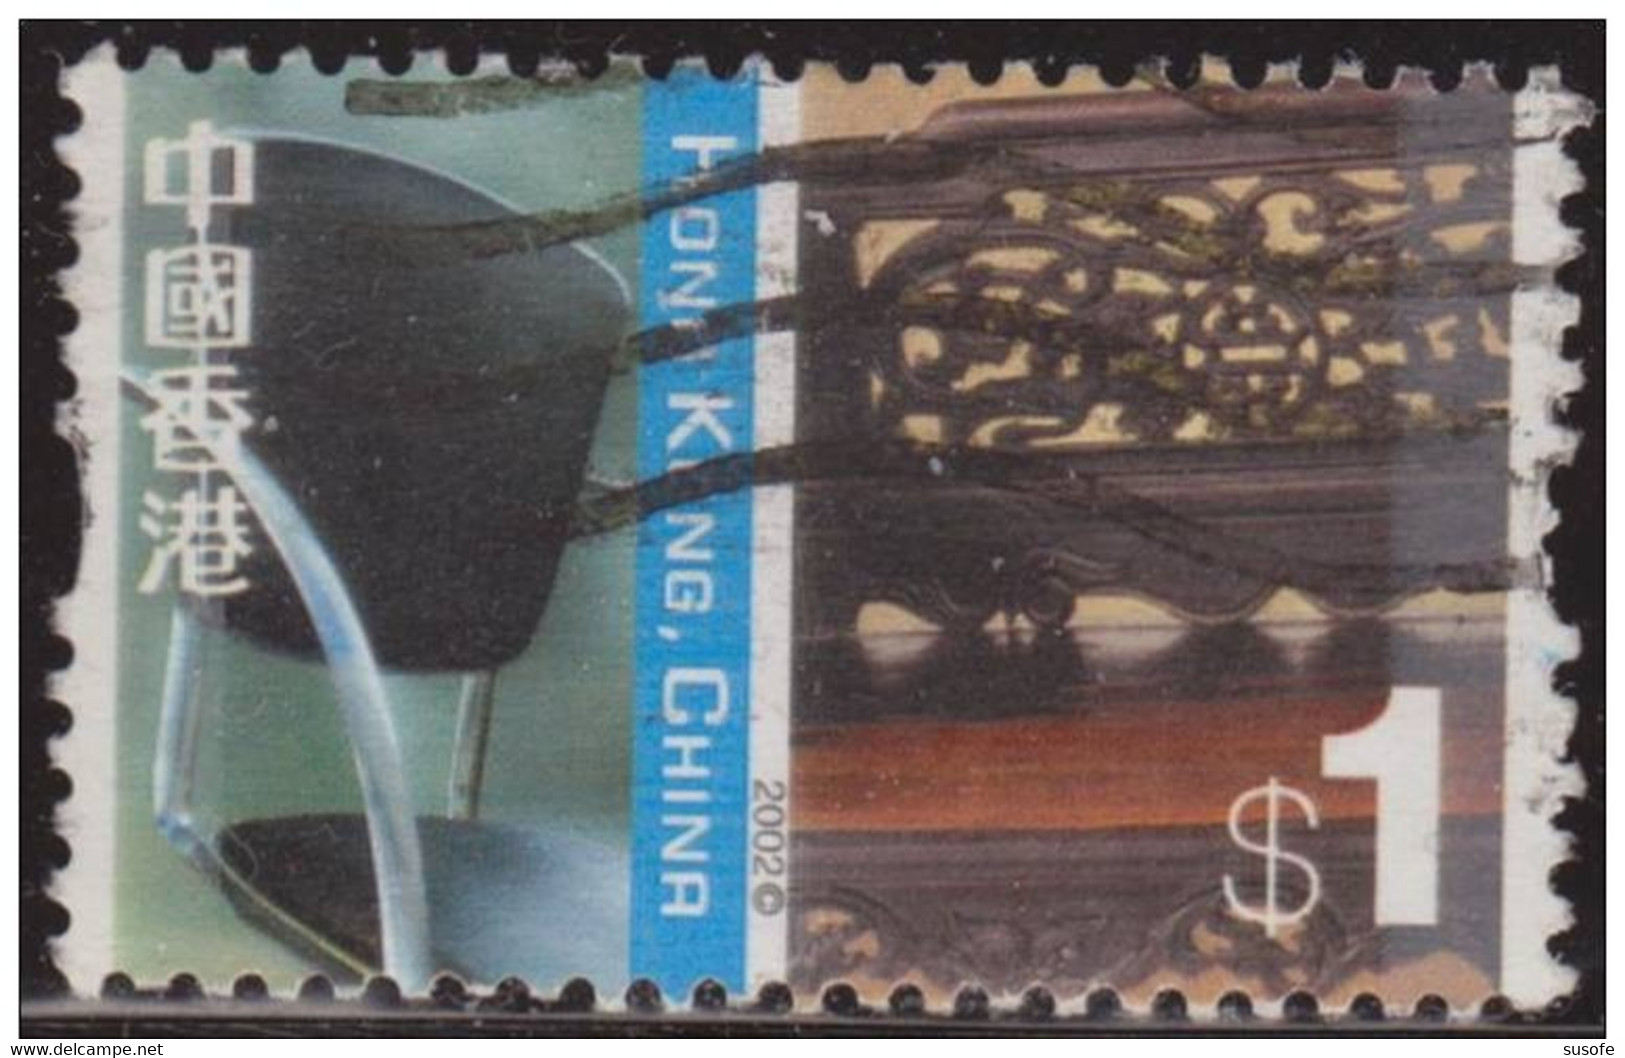 Hong Kong China 2002 Scott 1001 Sello º Cultural Diversity Silla China Y Cama Luohan Michel 1058 Yvert 1030 Stamps - Used Stamps